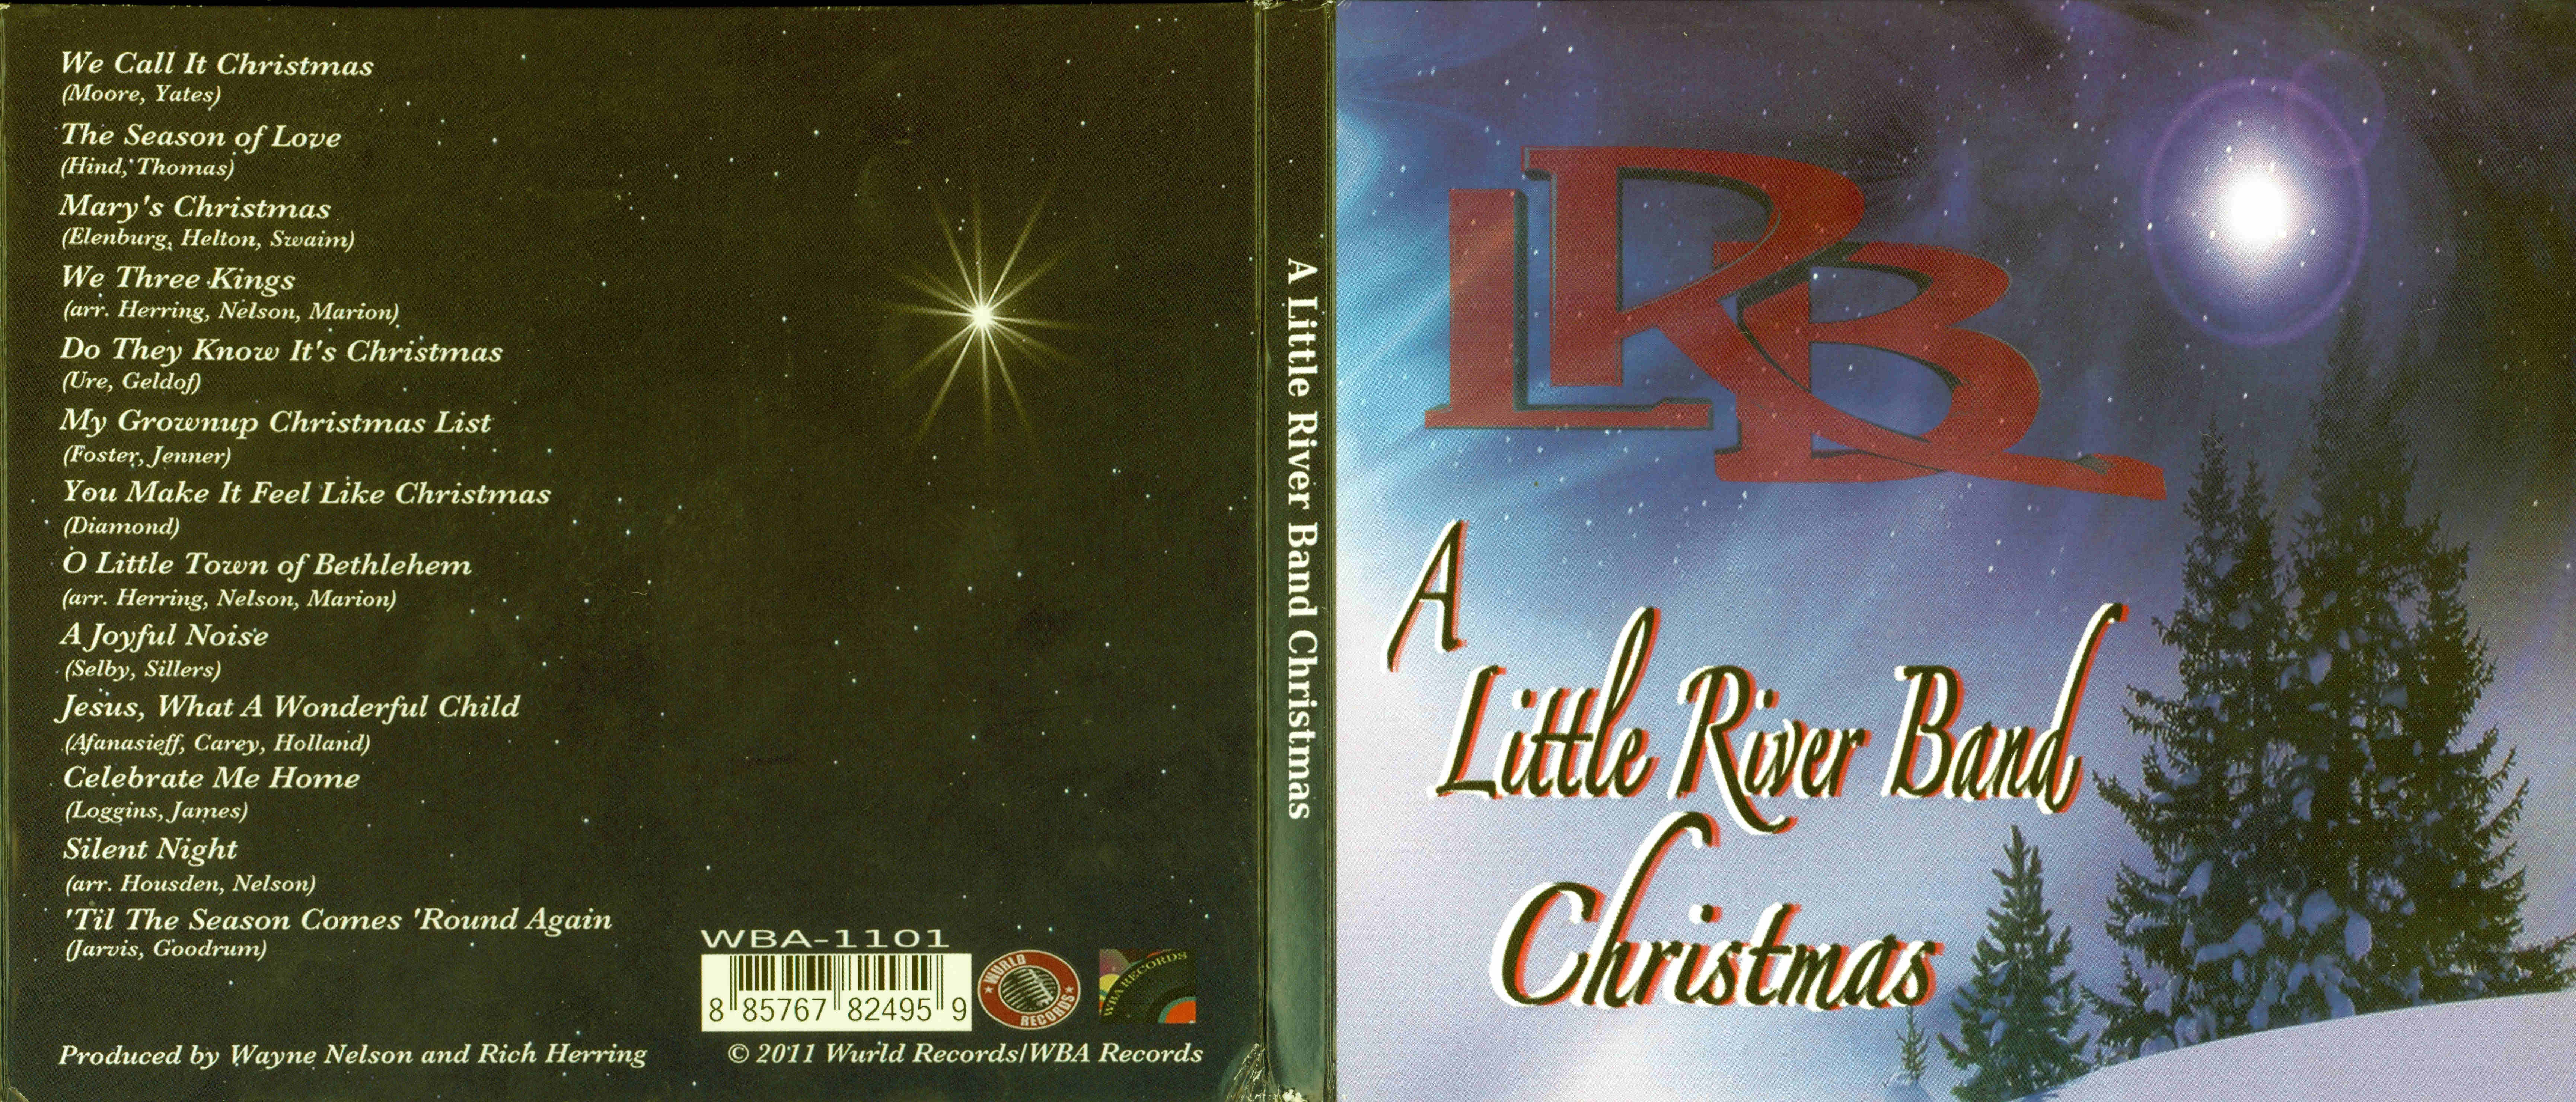 A Little River Band Christmas 2011